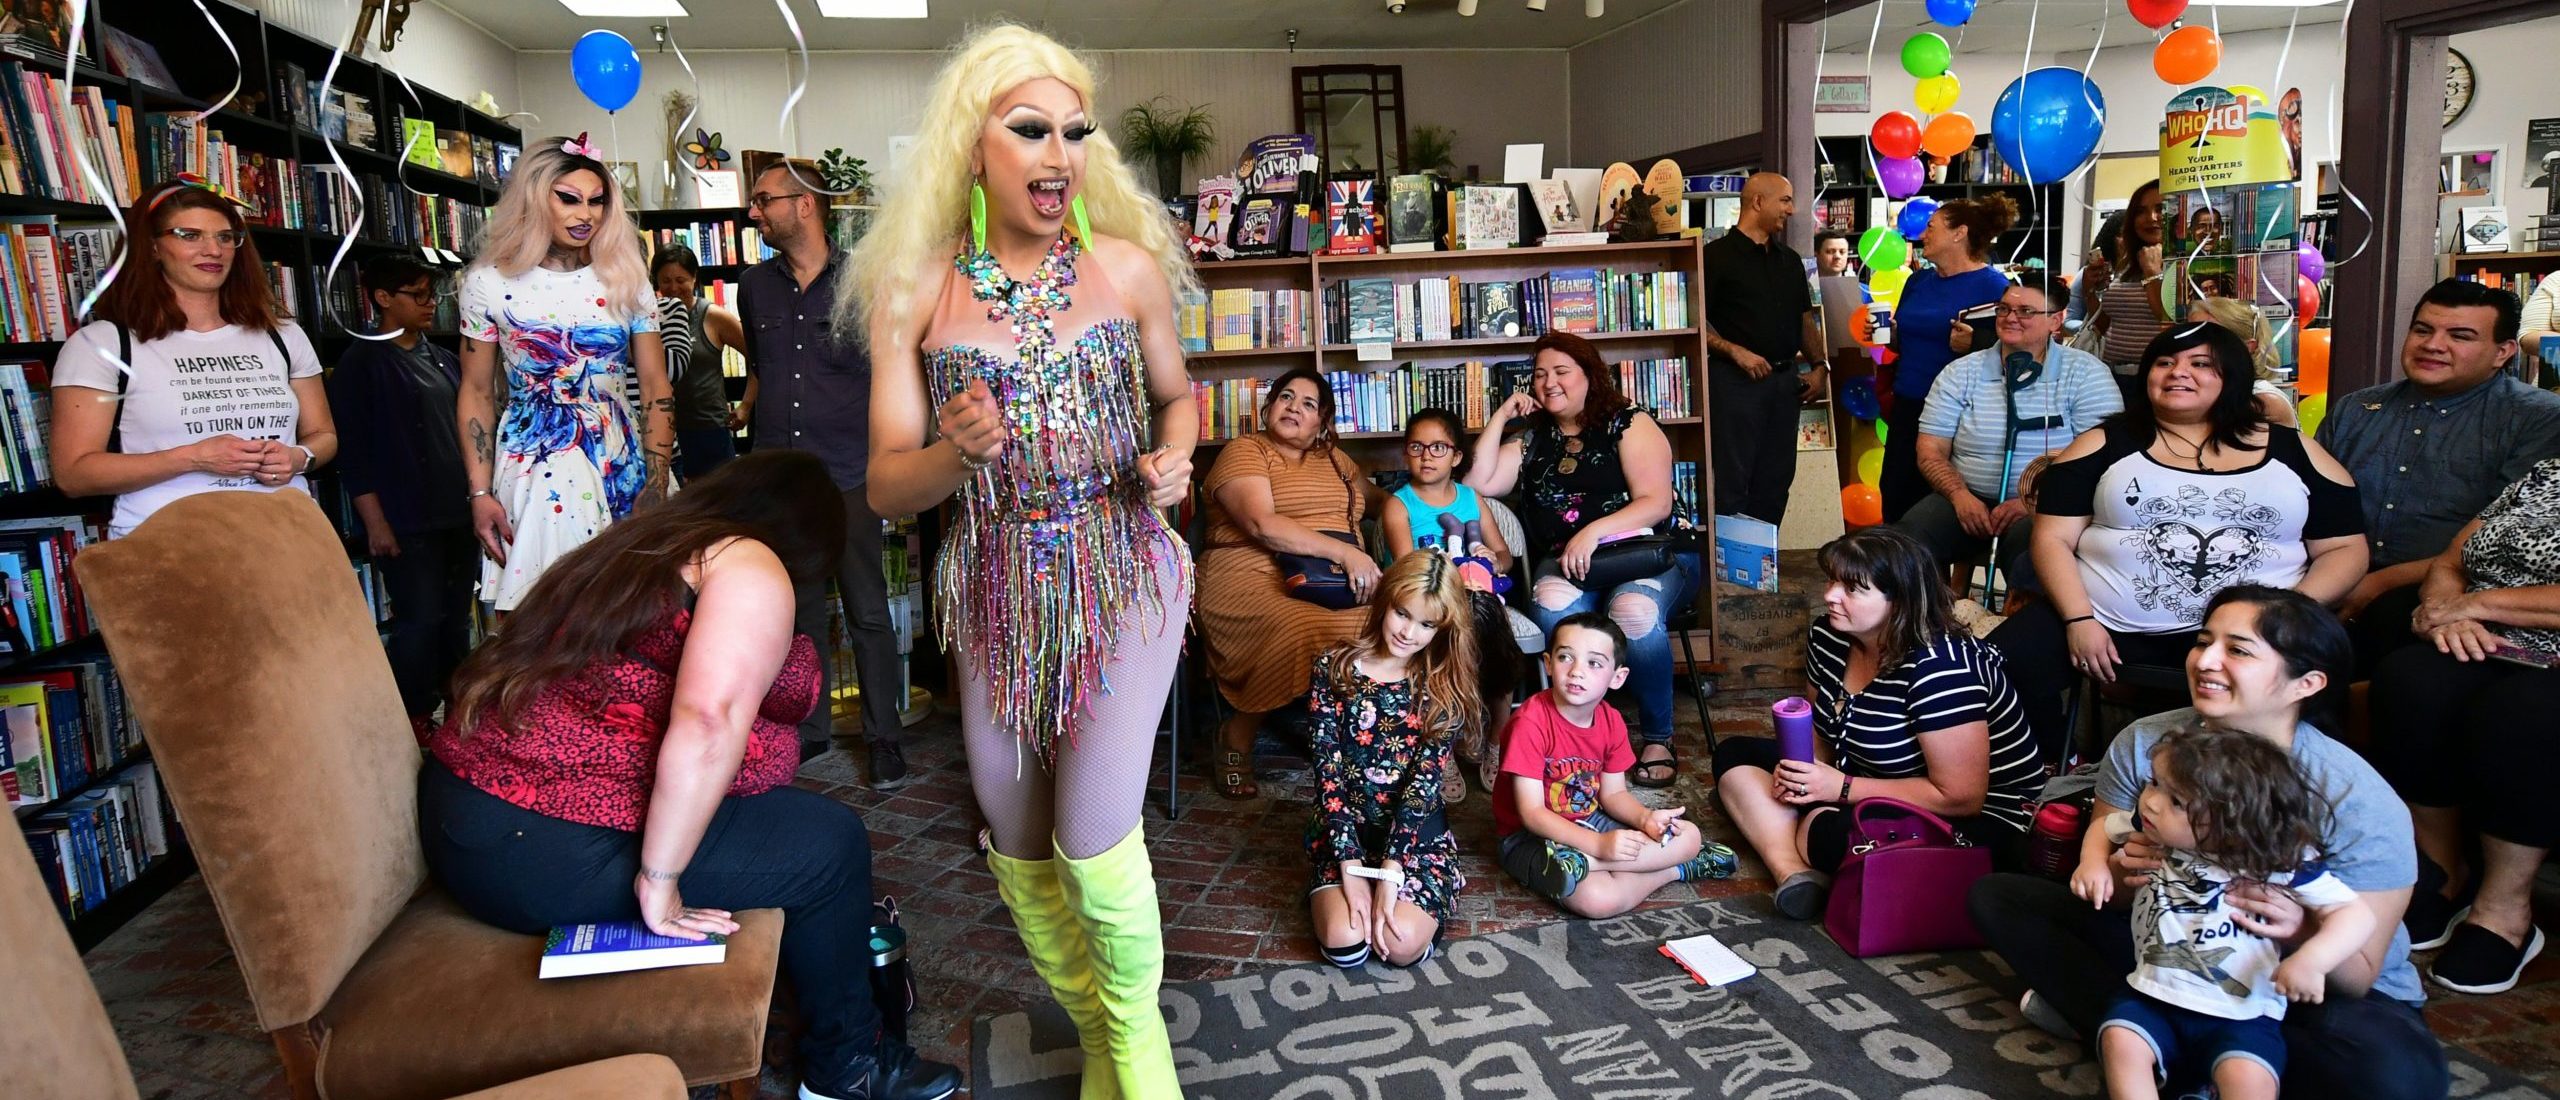 Jewish Community Center To Host Drag Queen Story Hour As Part Of ‘Family Fun’ Day